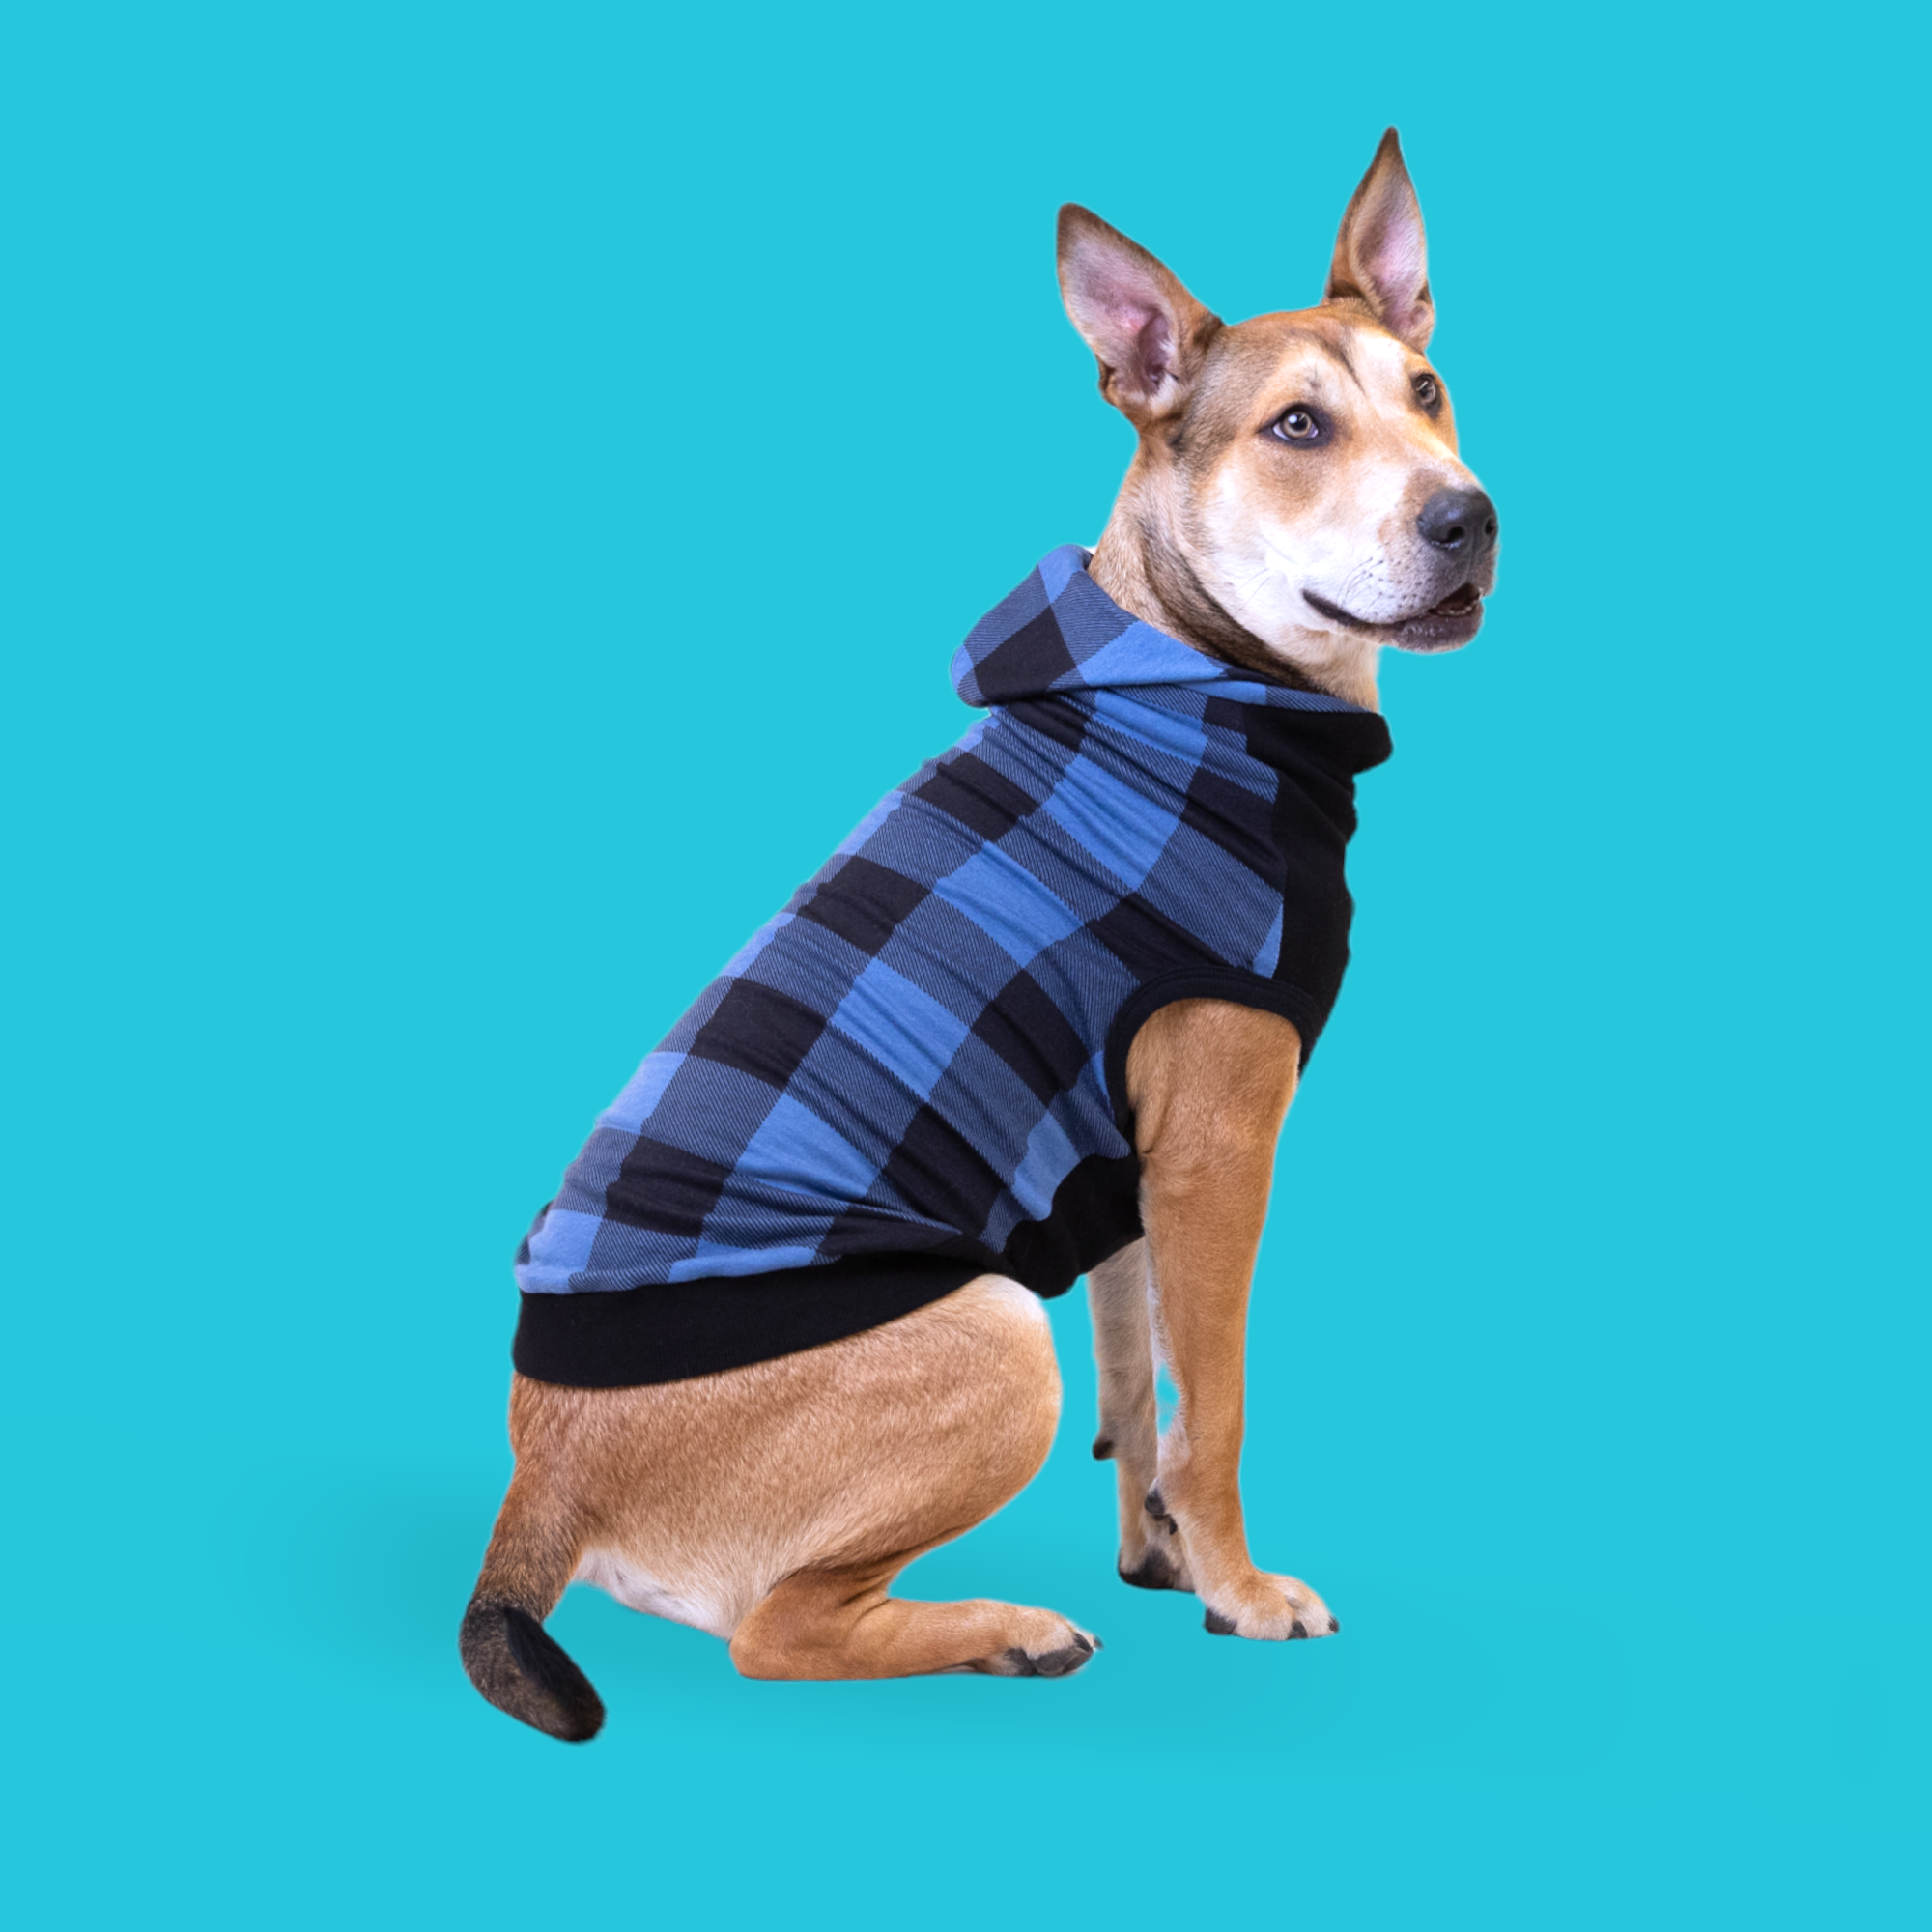 III. Factors to Consider when Choosing Dog Clothing